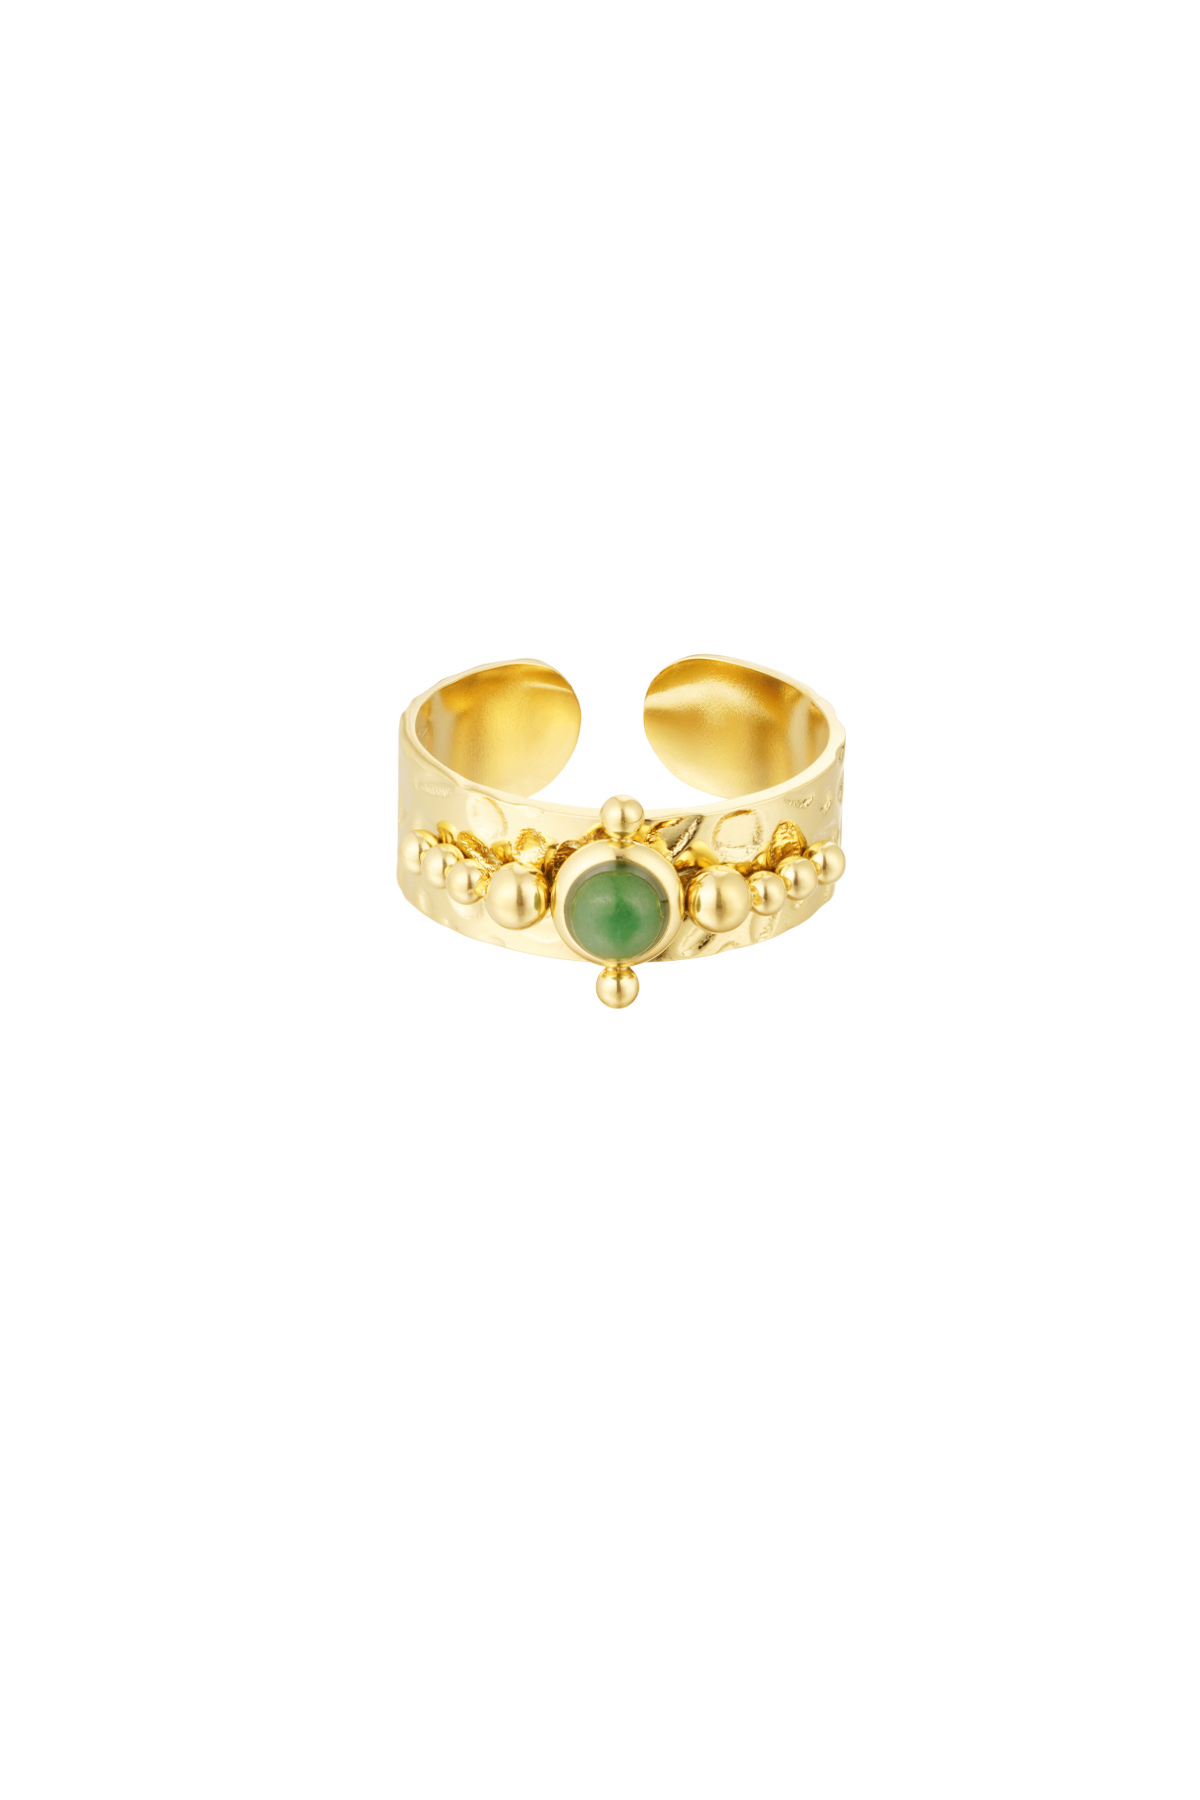 Ring stone with decoration - gold/green